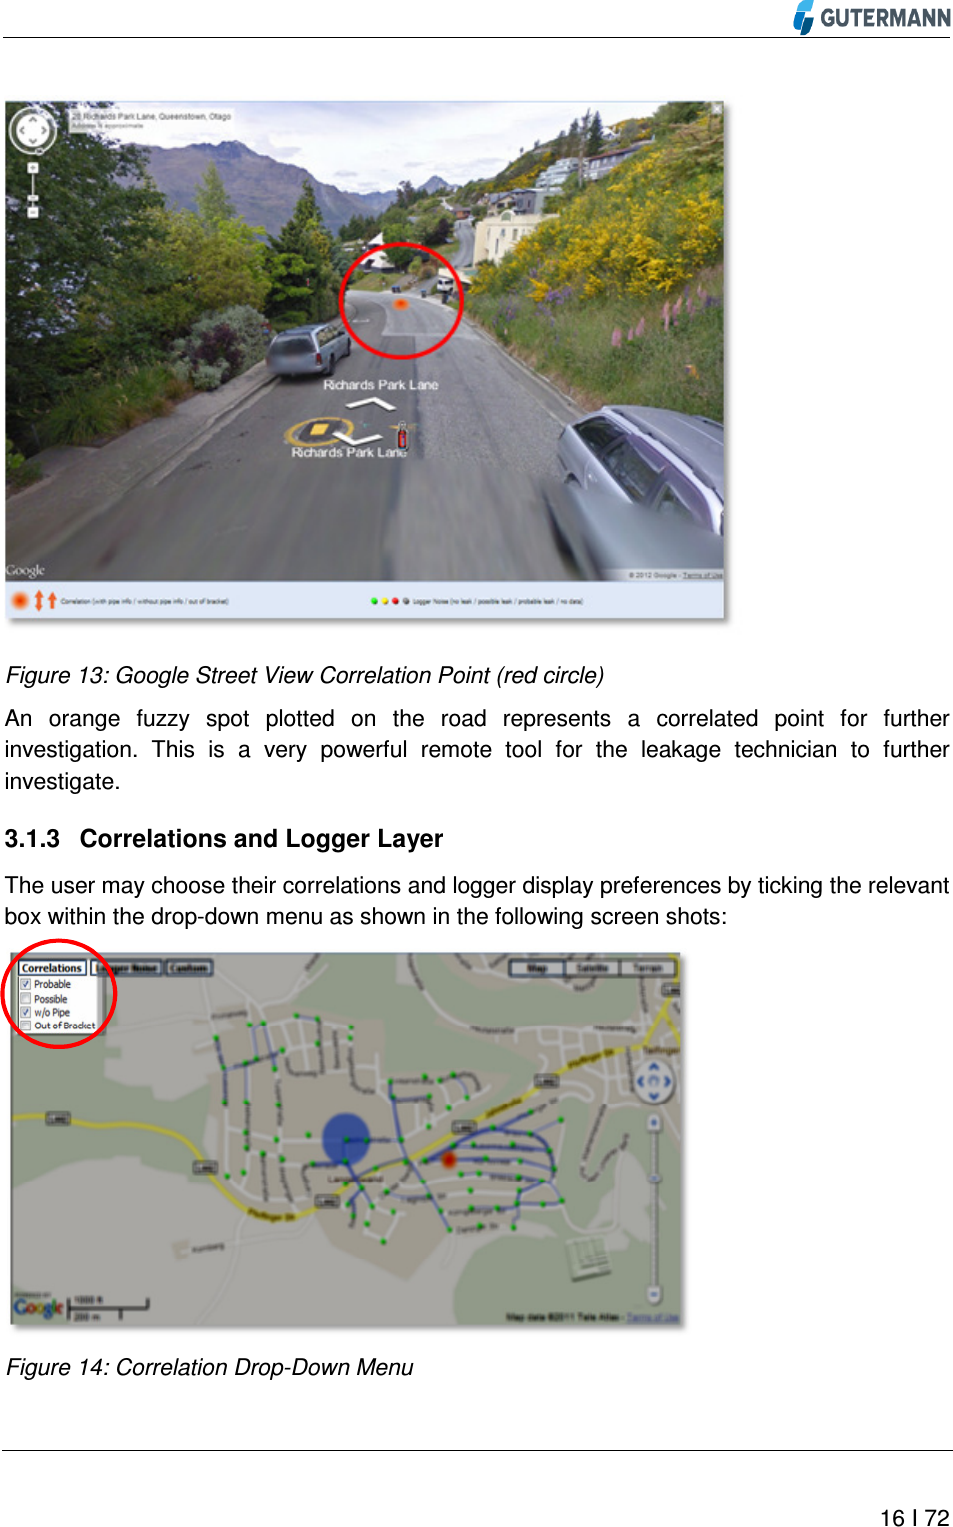          16 I 72   Figure 13: Google Street View Correlation Point (red circle) An  orange  fuzzy  spot  plotted  on  the  road  represents  a  correlated  point  for  further investigation.  This  is  a  very  powerful  remote  tool  for  the  leakage  technician  to  further investigate. 3.1.3  Correlations and Logger Layer The user may choose their correlations and logger display preferences by ticking the relevant box within the drop-down menu as shown in the following screen shots:  Figure 14: Correlation Drop-Down Menu 